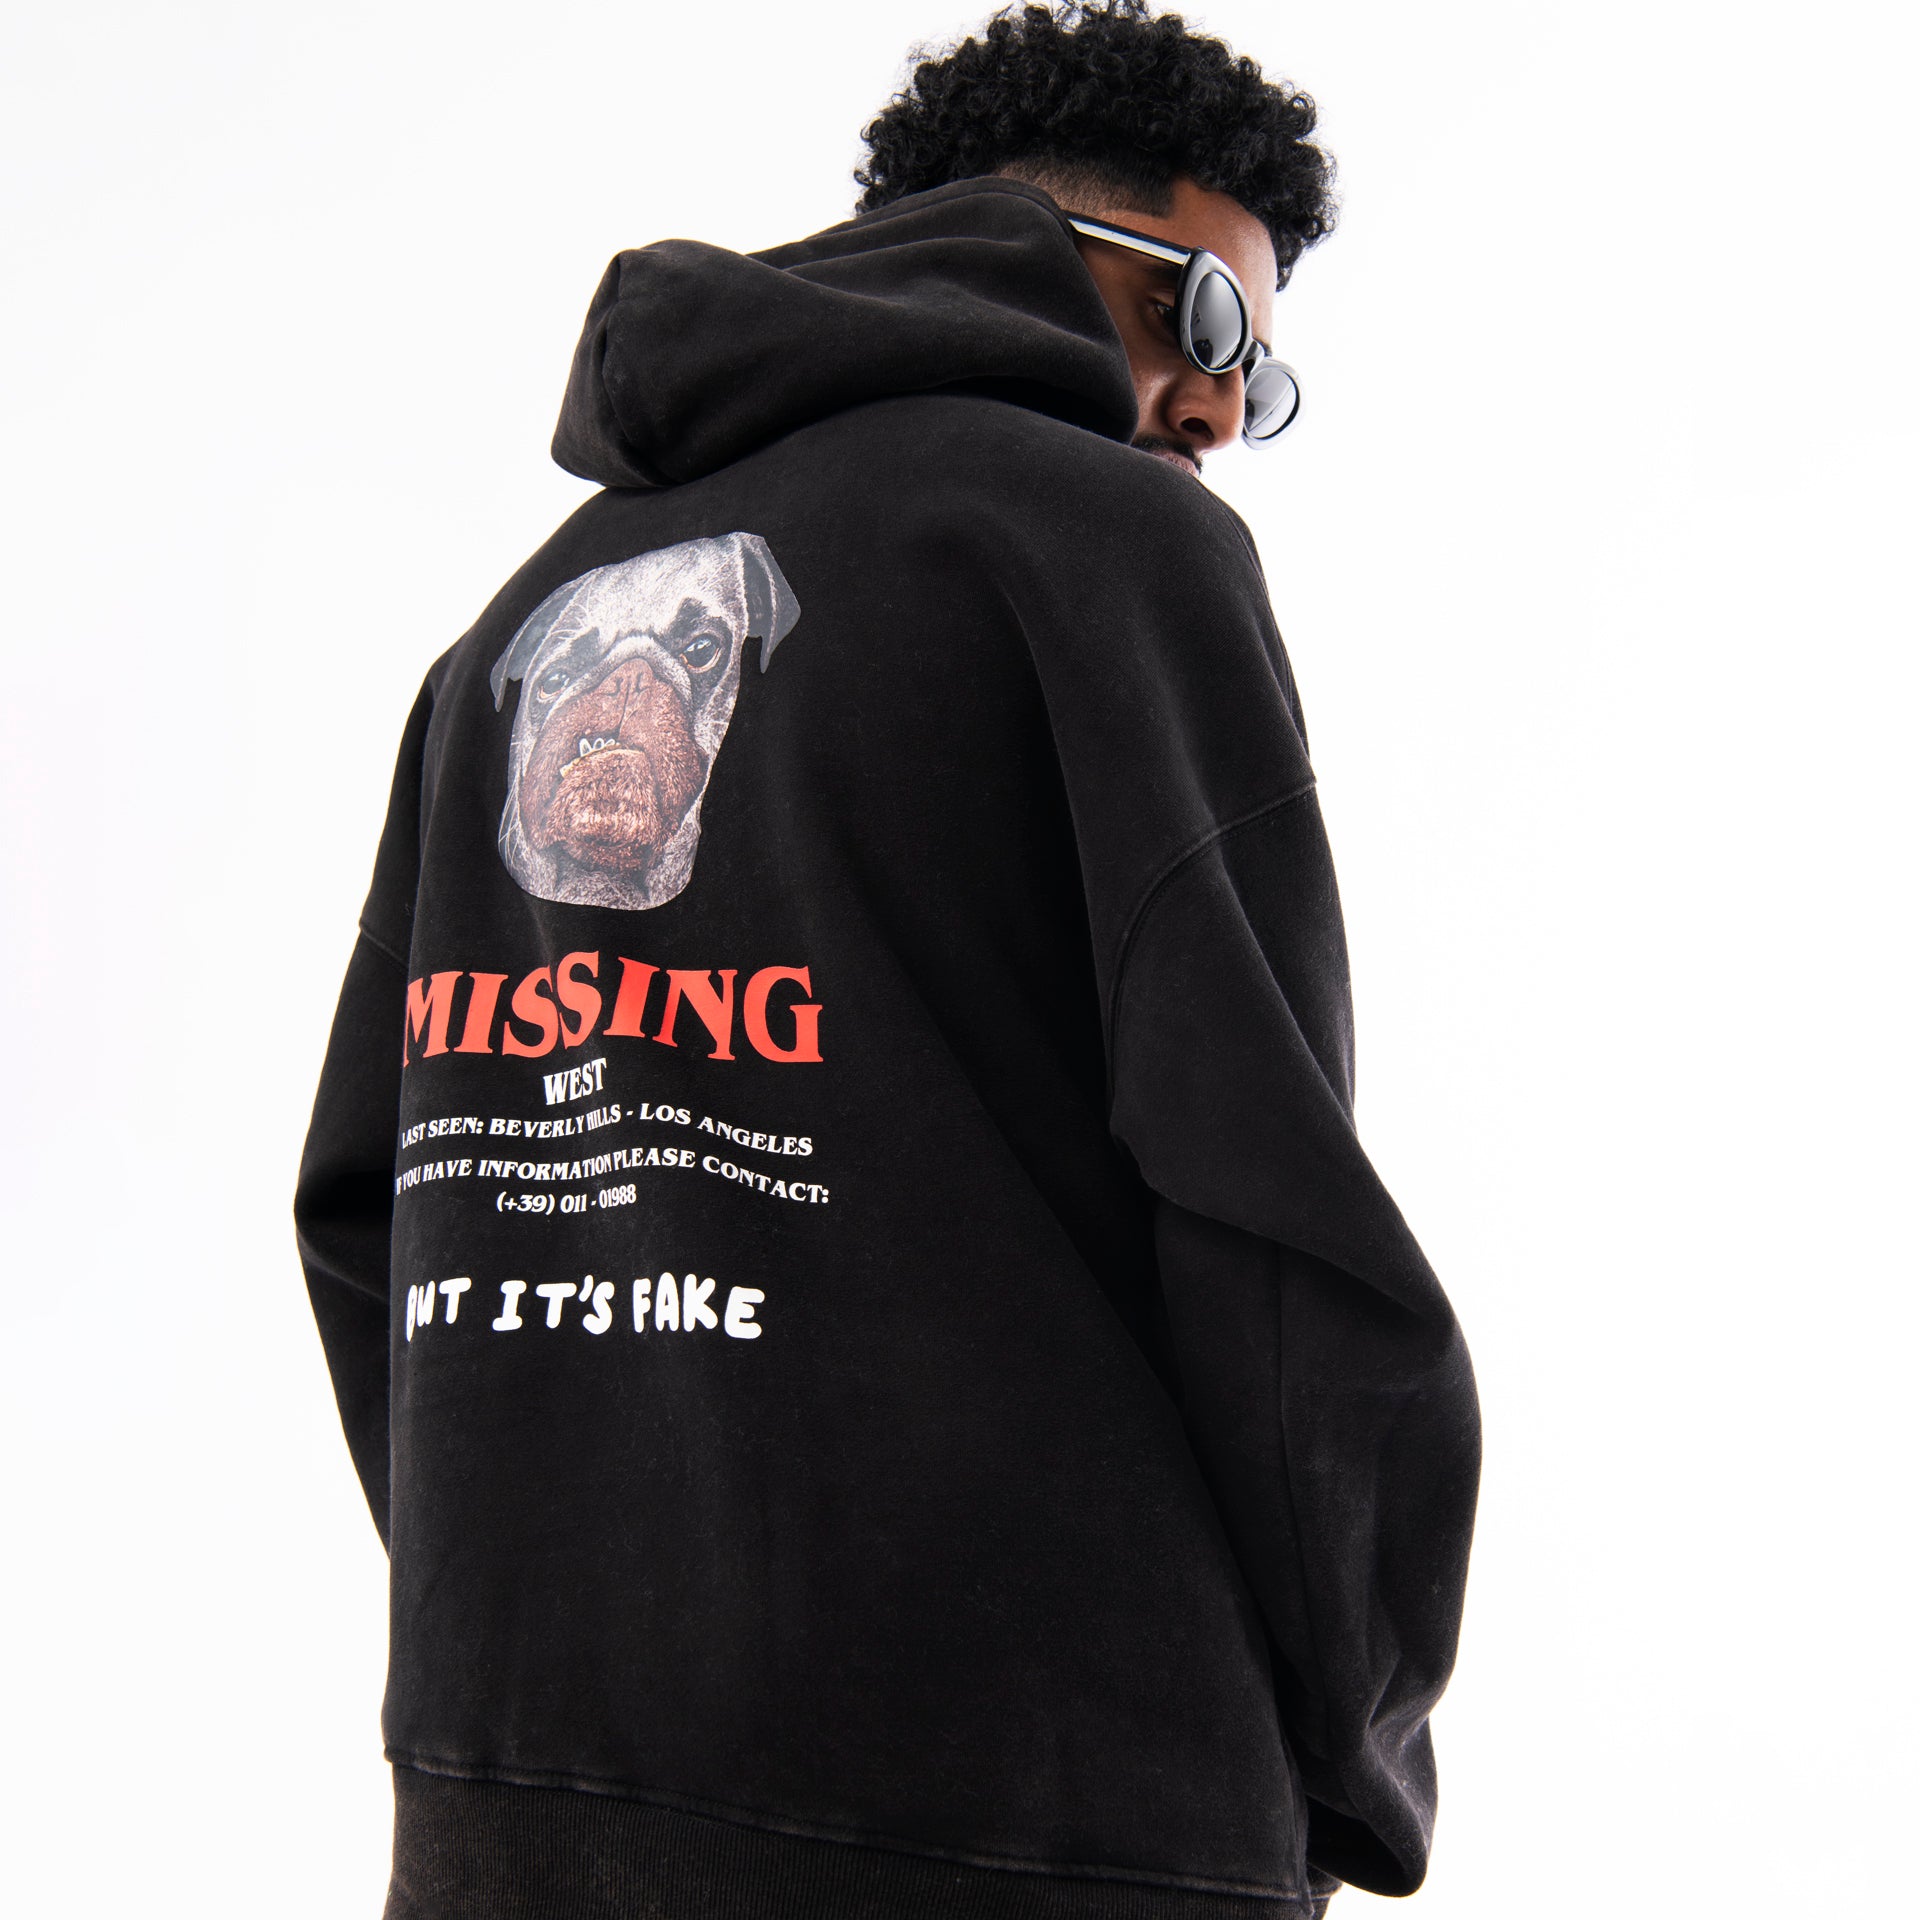 Black Fake Hoodie From I'm West